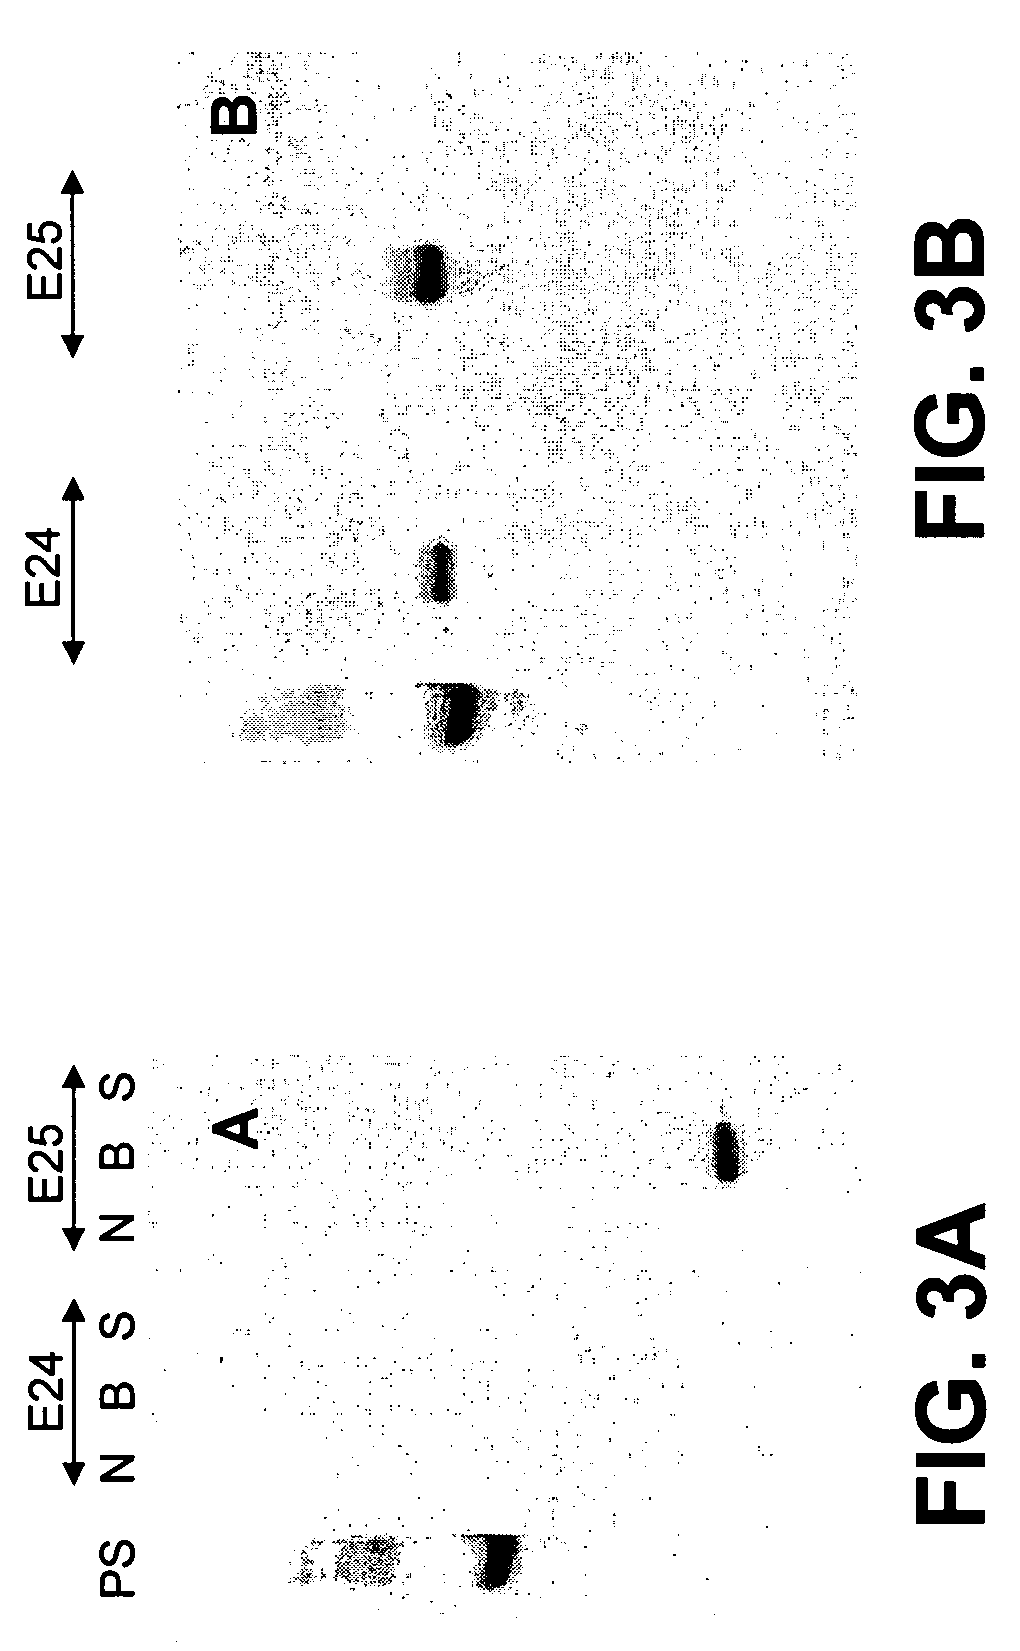 Method for purification of a protein complex and identification of its components